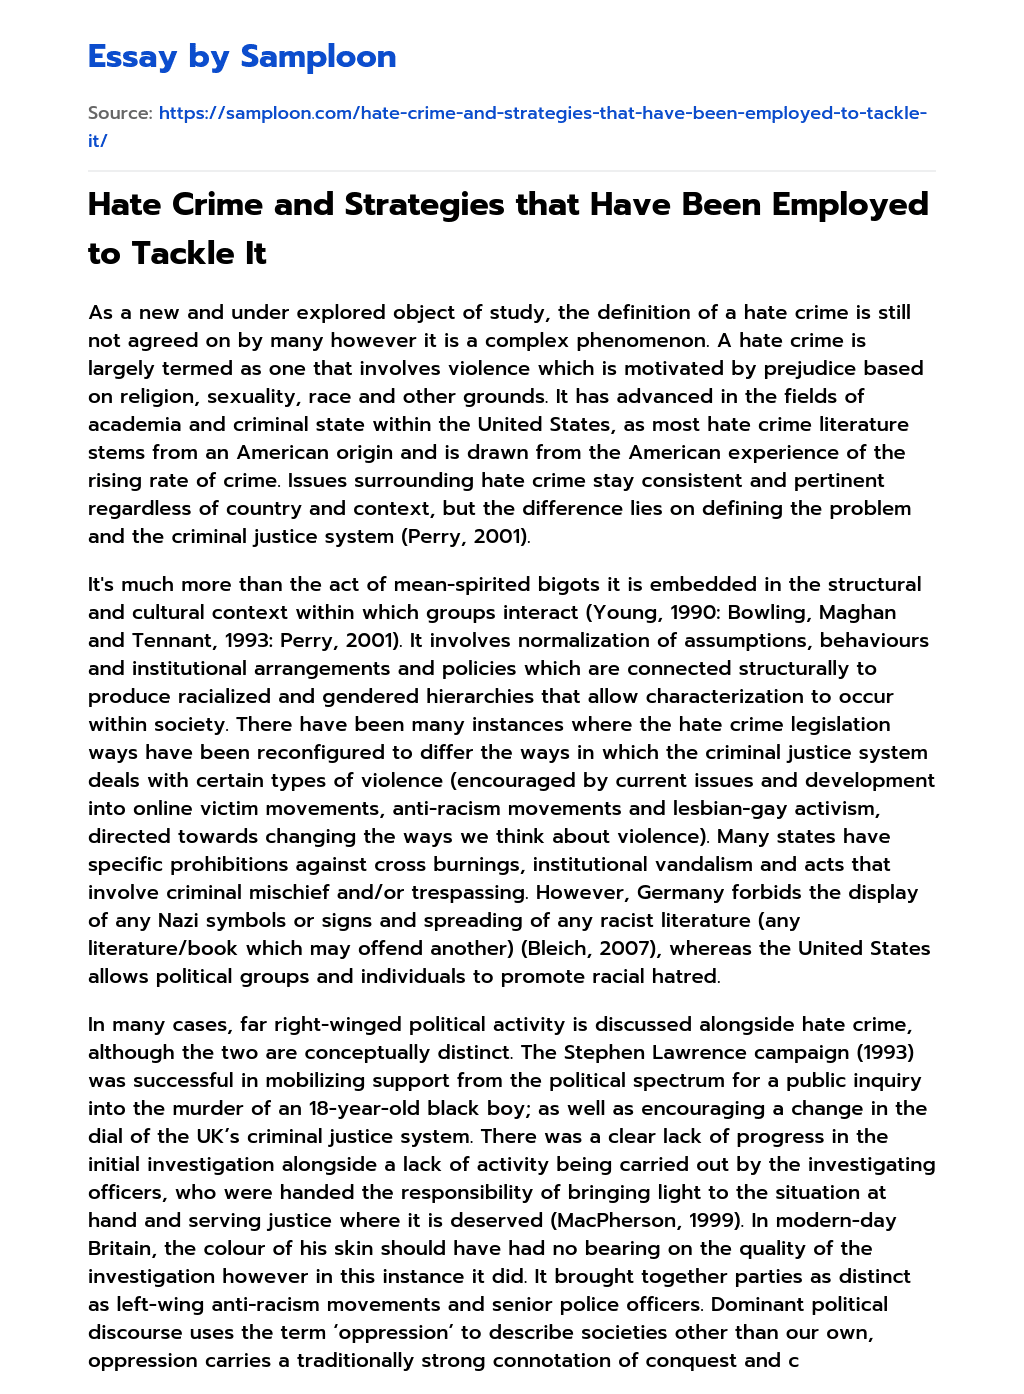 Hate Crime and Strategies that Have Been Employed to Tackle It essay